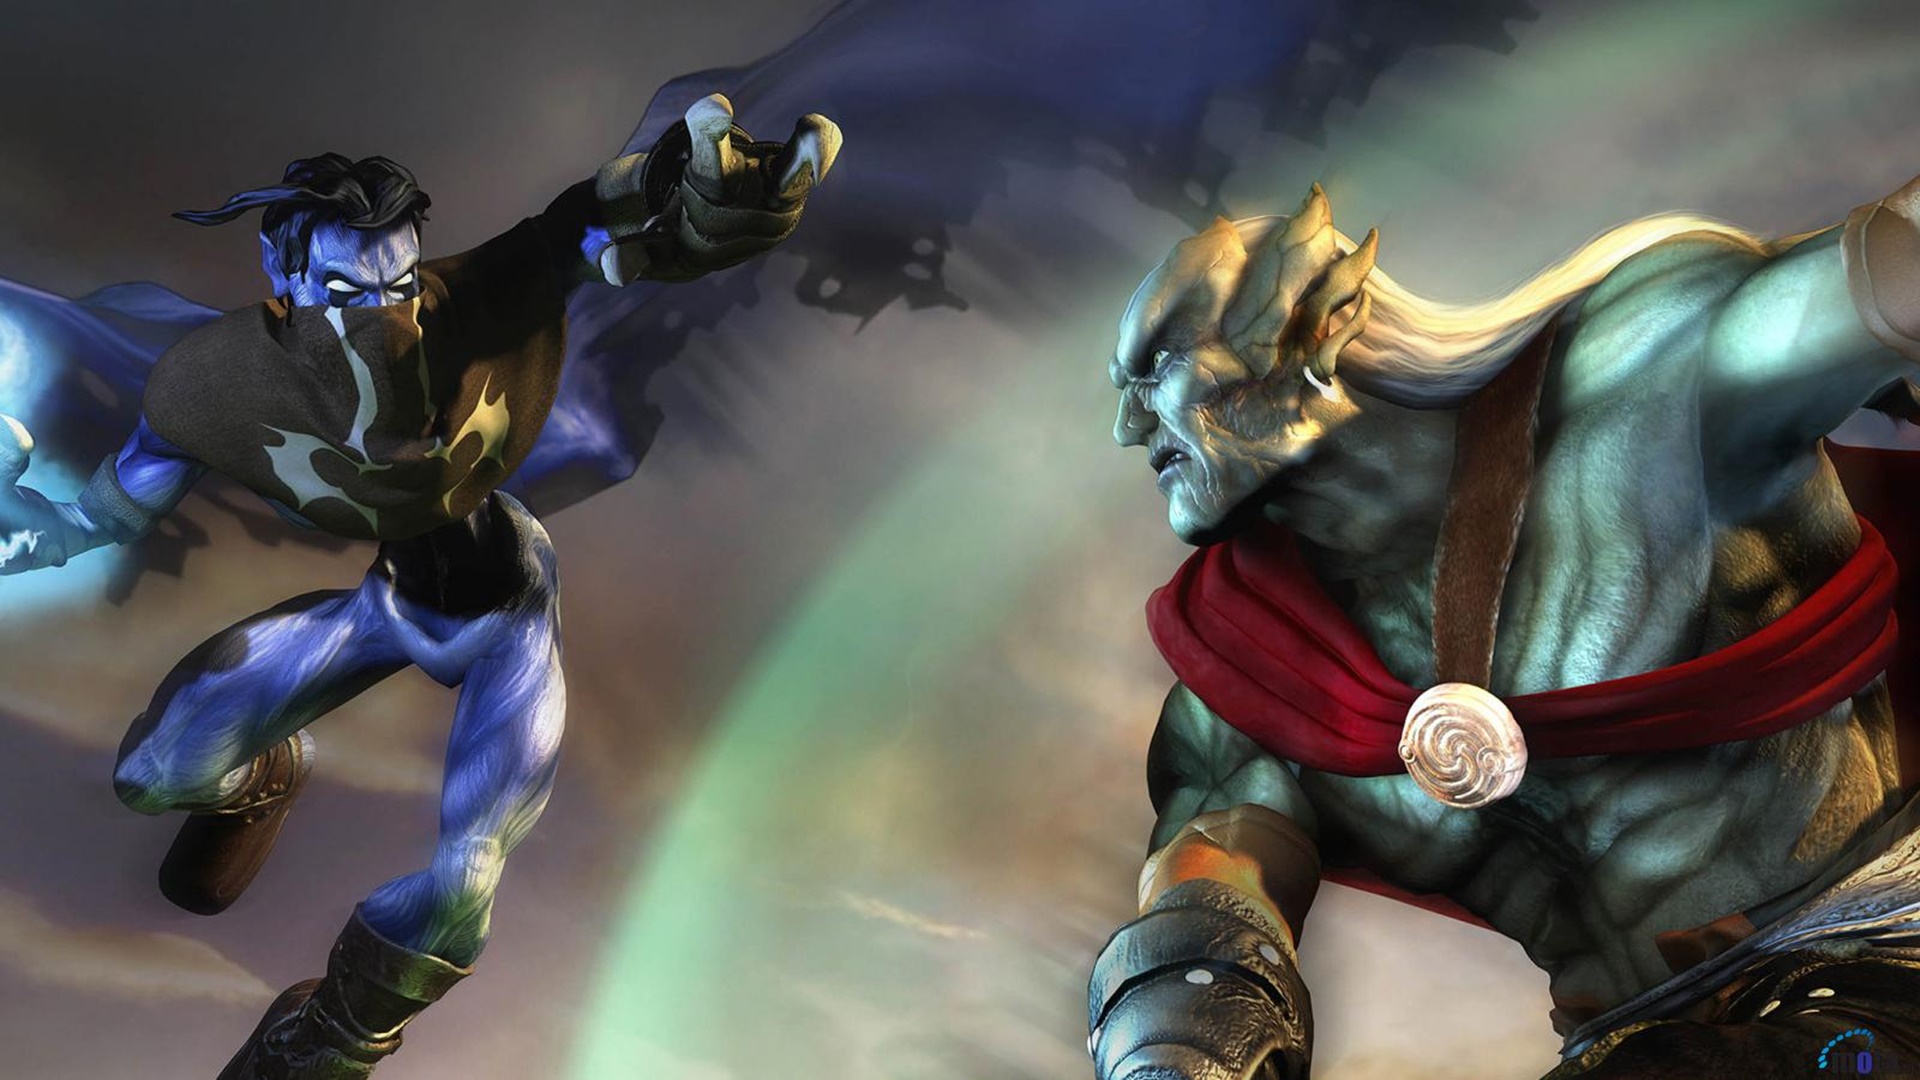 A fight between Kain and Raziel, the protagonists of Legacy of Kain, one of the best vampire games on PC